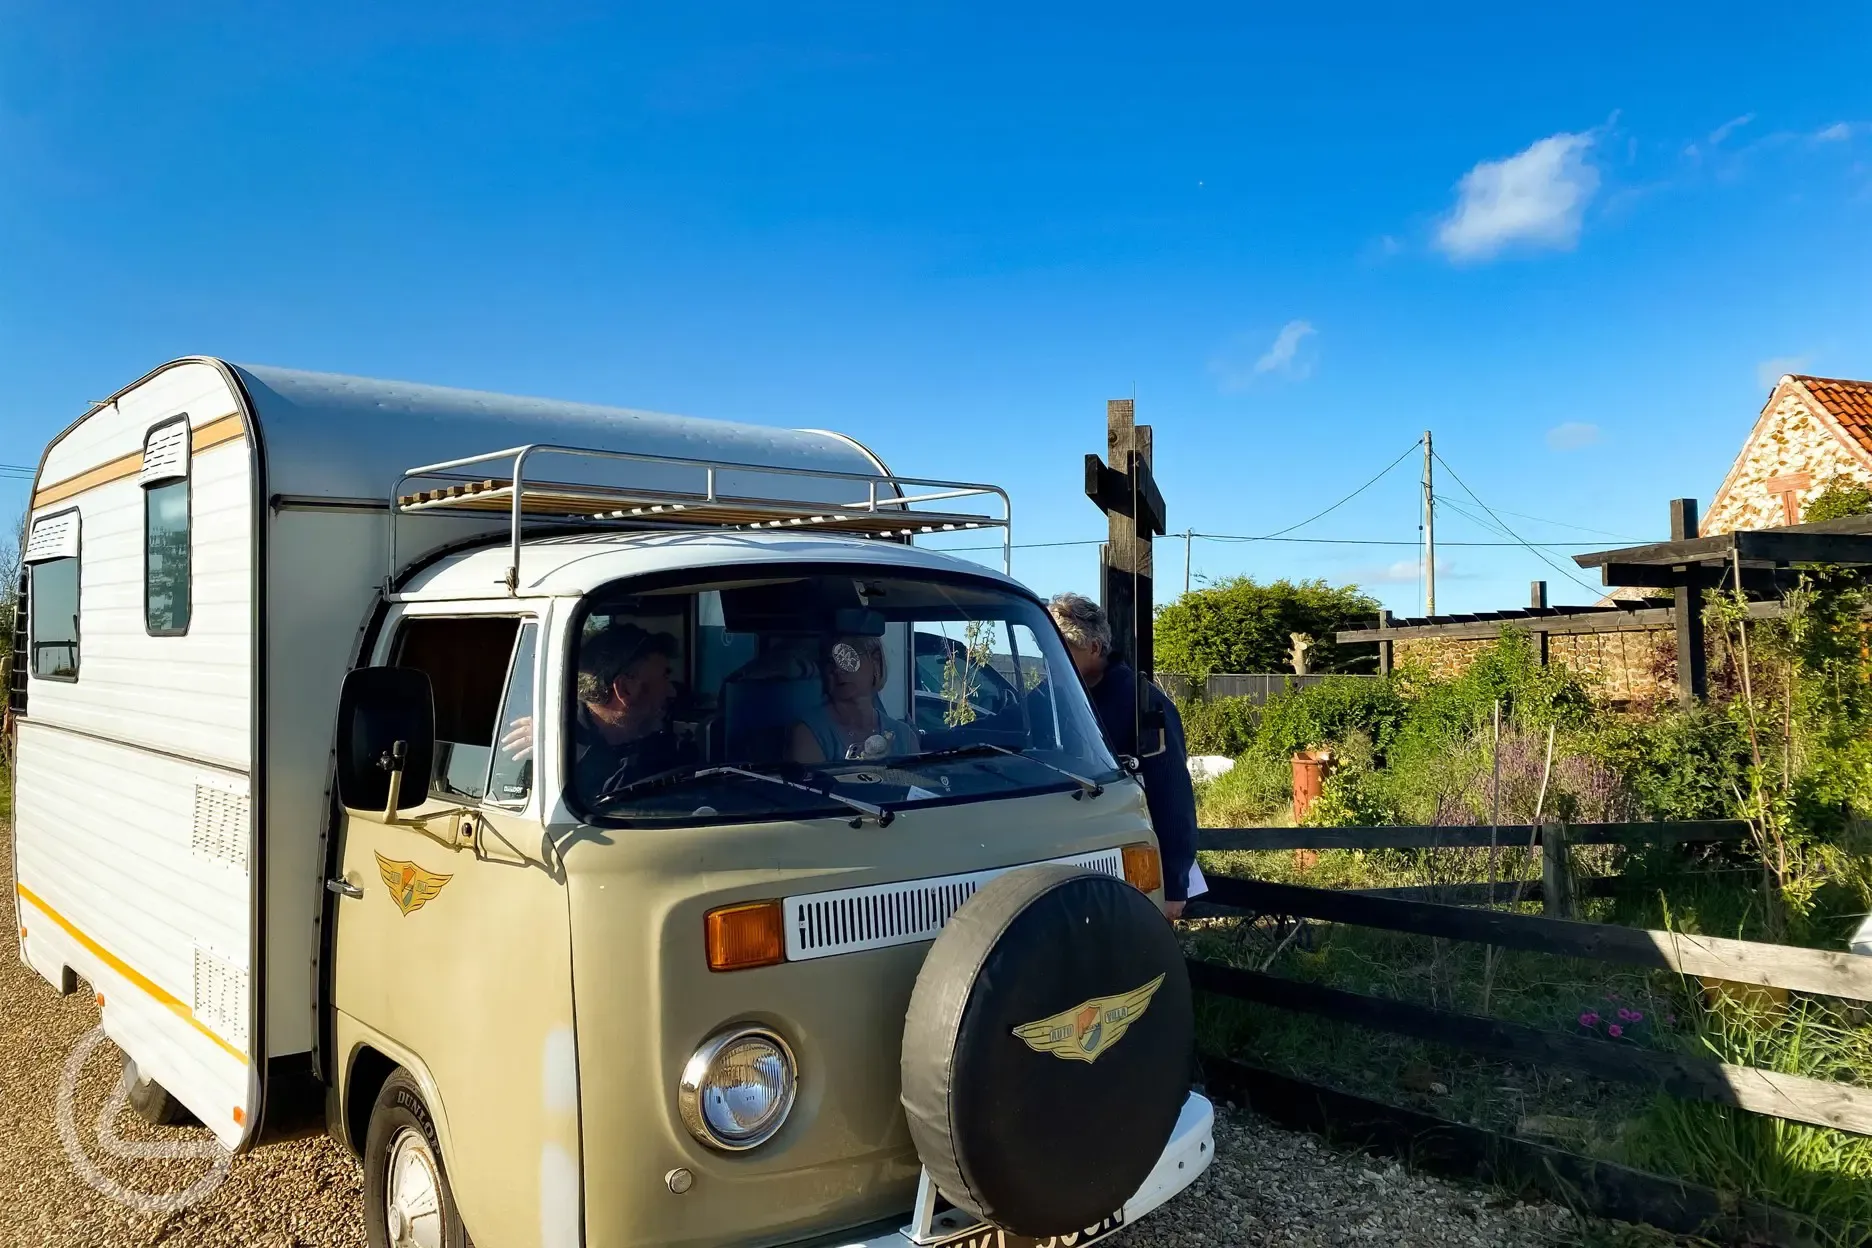 Welcome to this vintage campervan, earliest of its kind